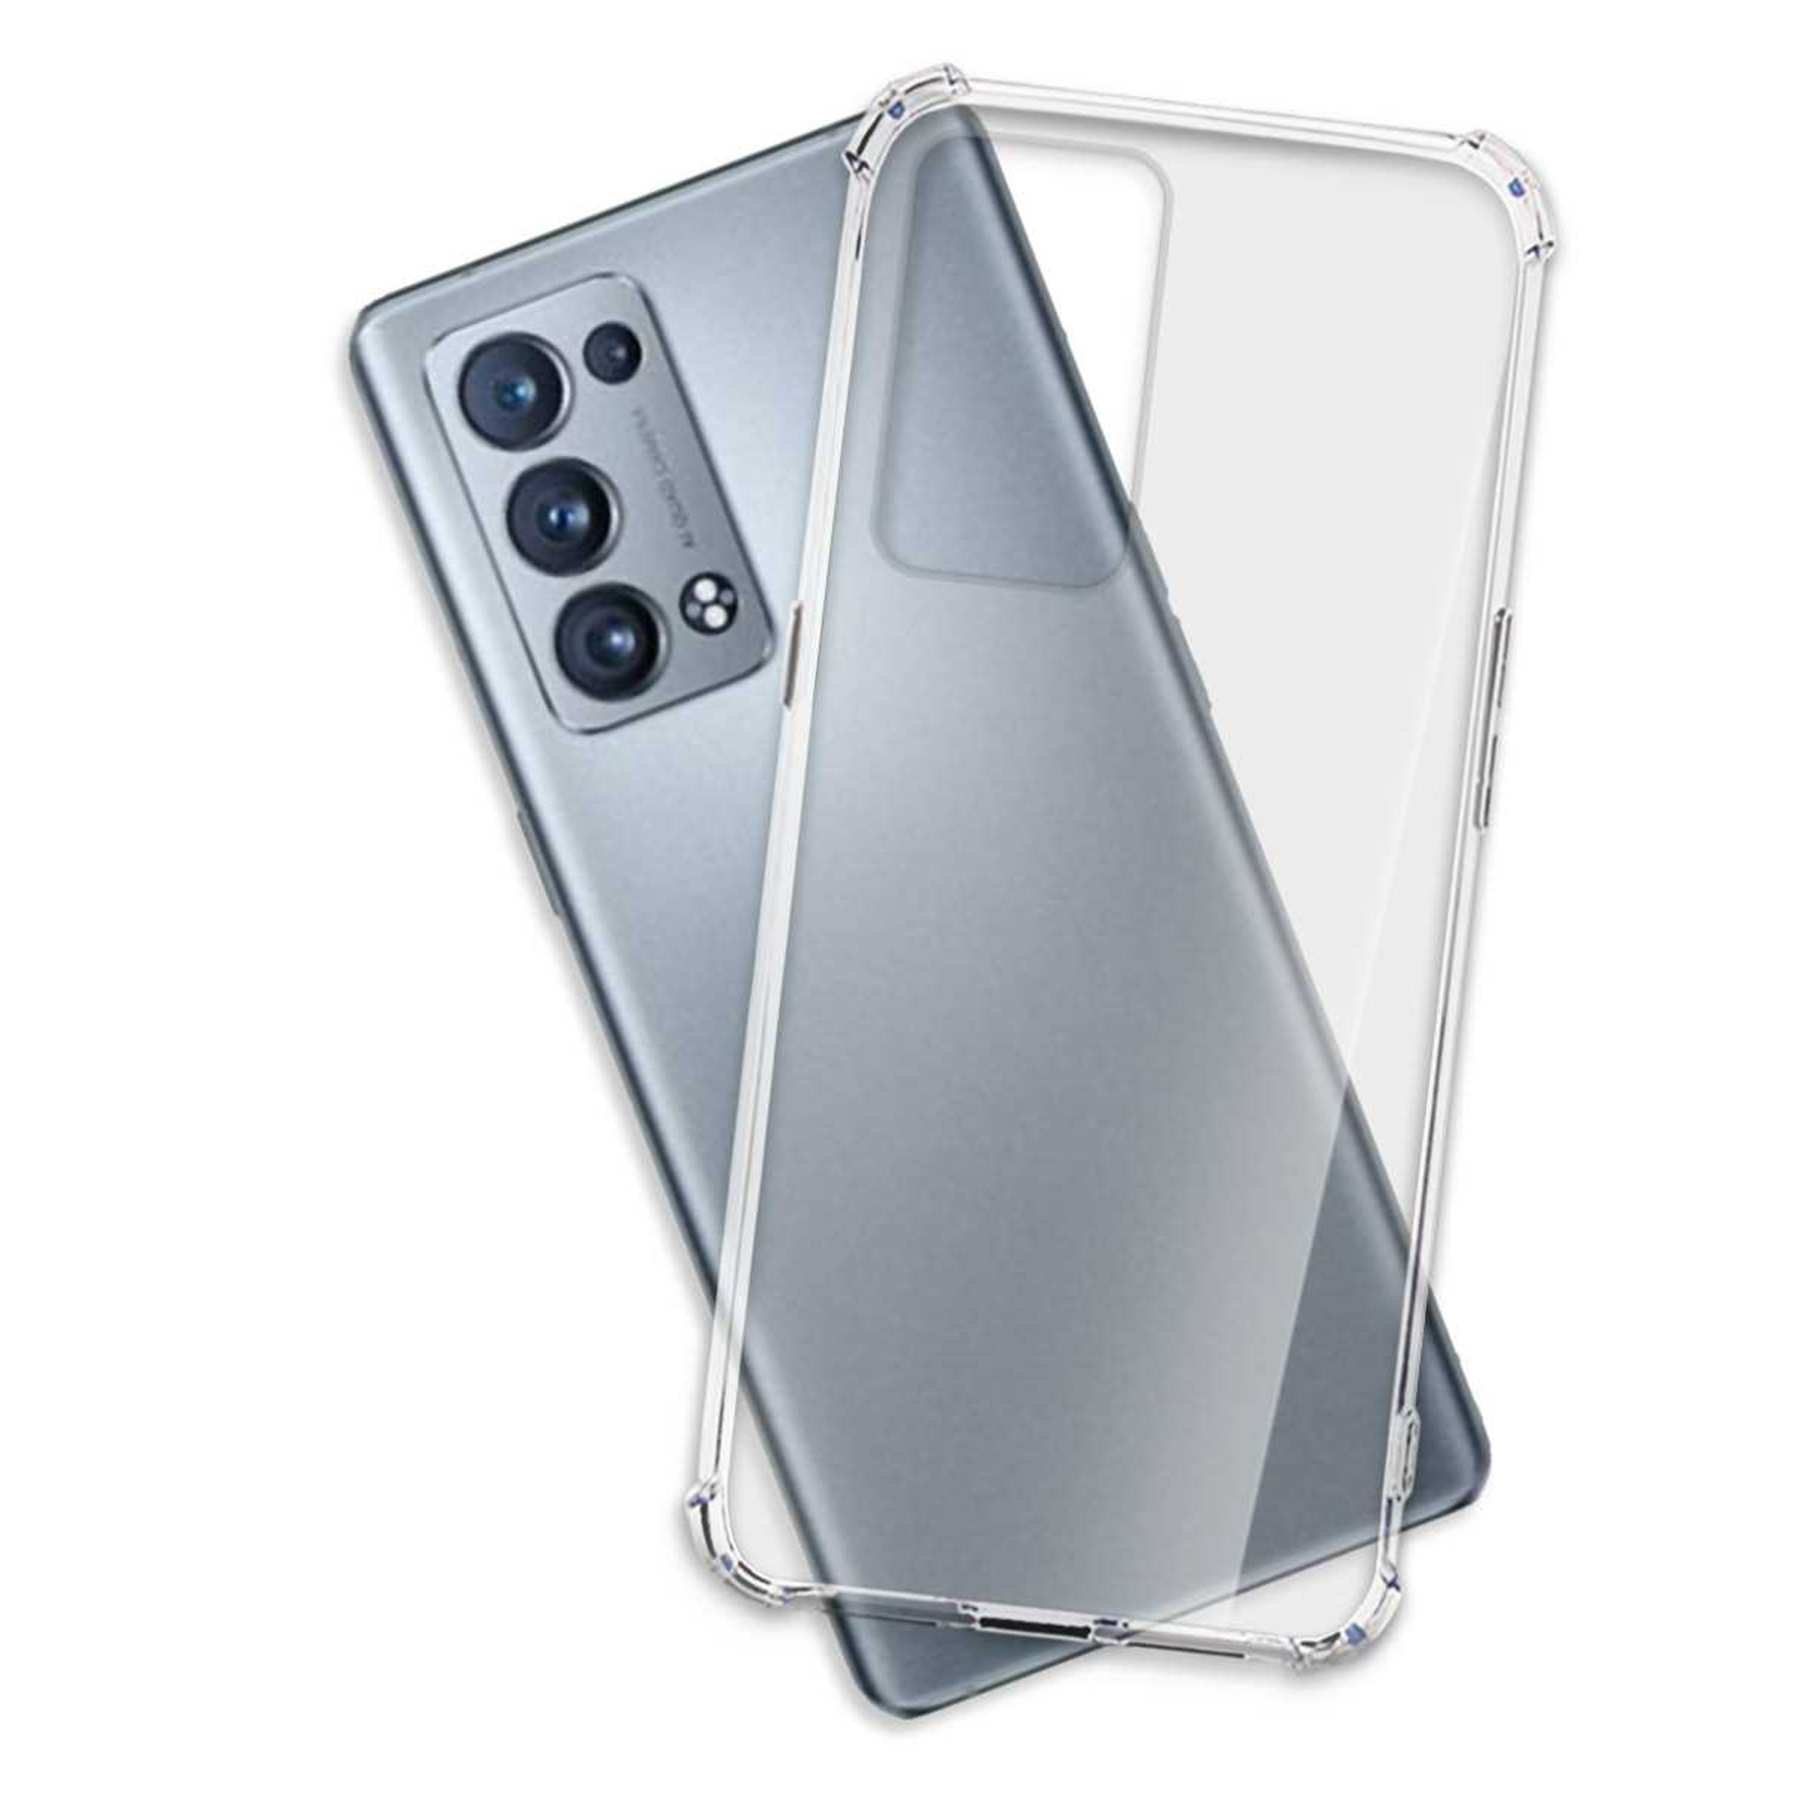 MTB MORE ENERGY Clear Case, Transparent Backcover, 6 Reno 4G, Oppo, Armor